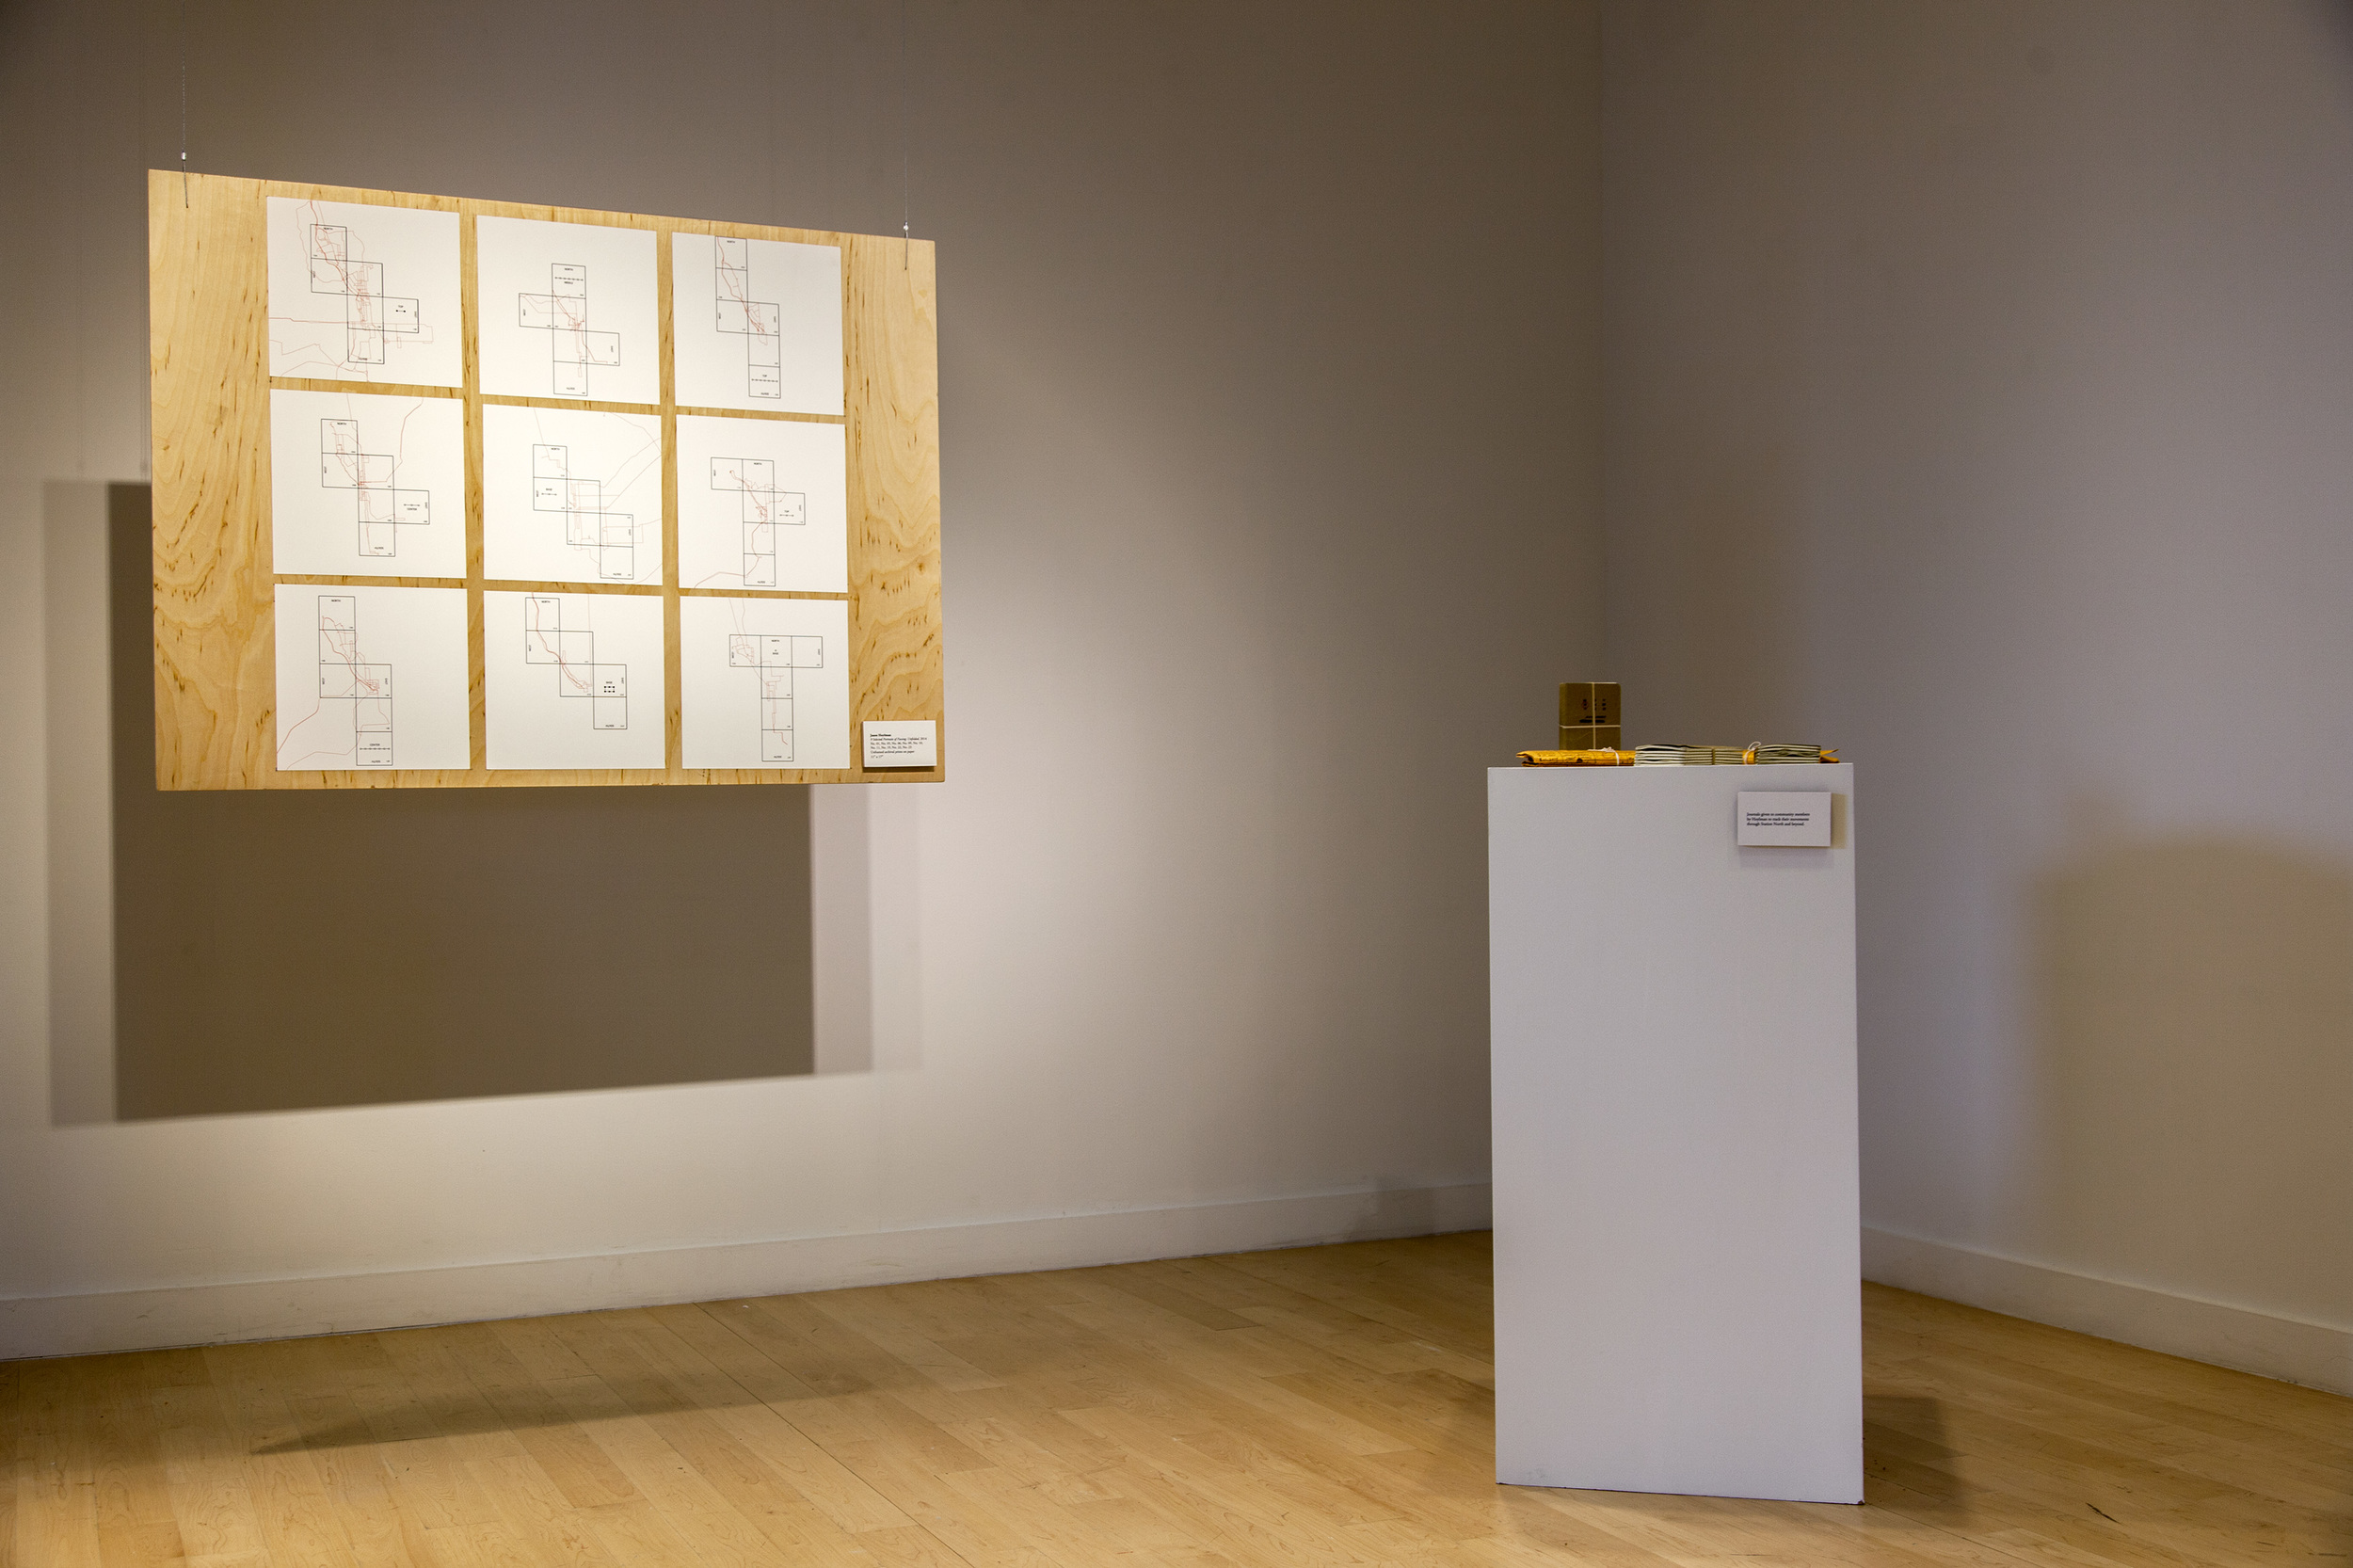   An installation shot of final artwork by Jason Hoylman. Maps representing the paths of his neighbors, and their journals on a pedestal.  